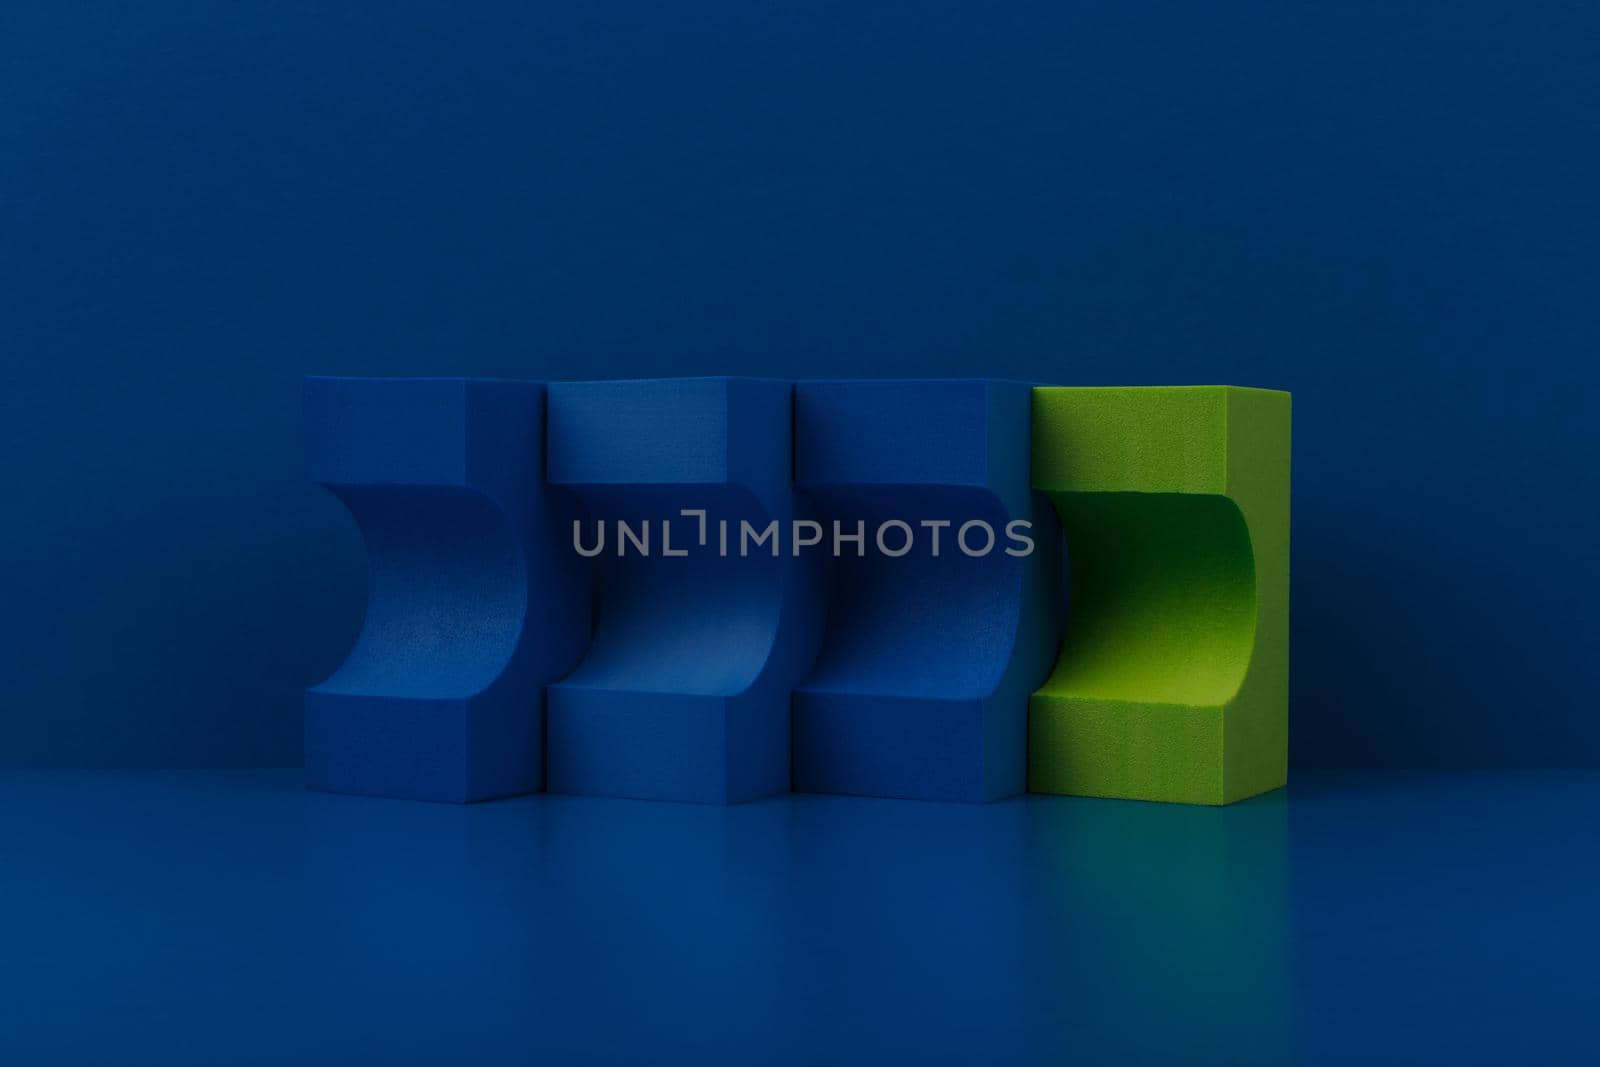 Abstract duotone background with blue and green figures on blue reflective table against blue background. Concept of advertising or promotional tamplate